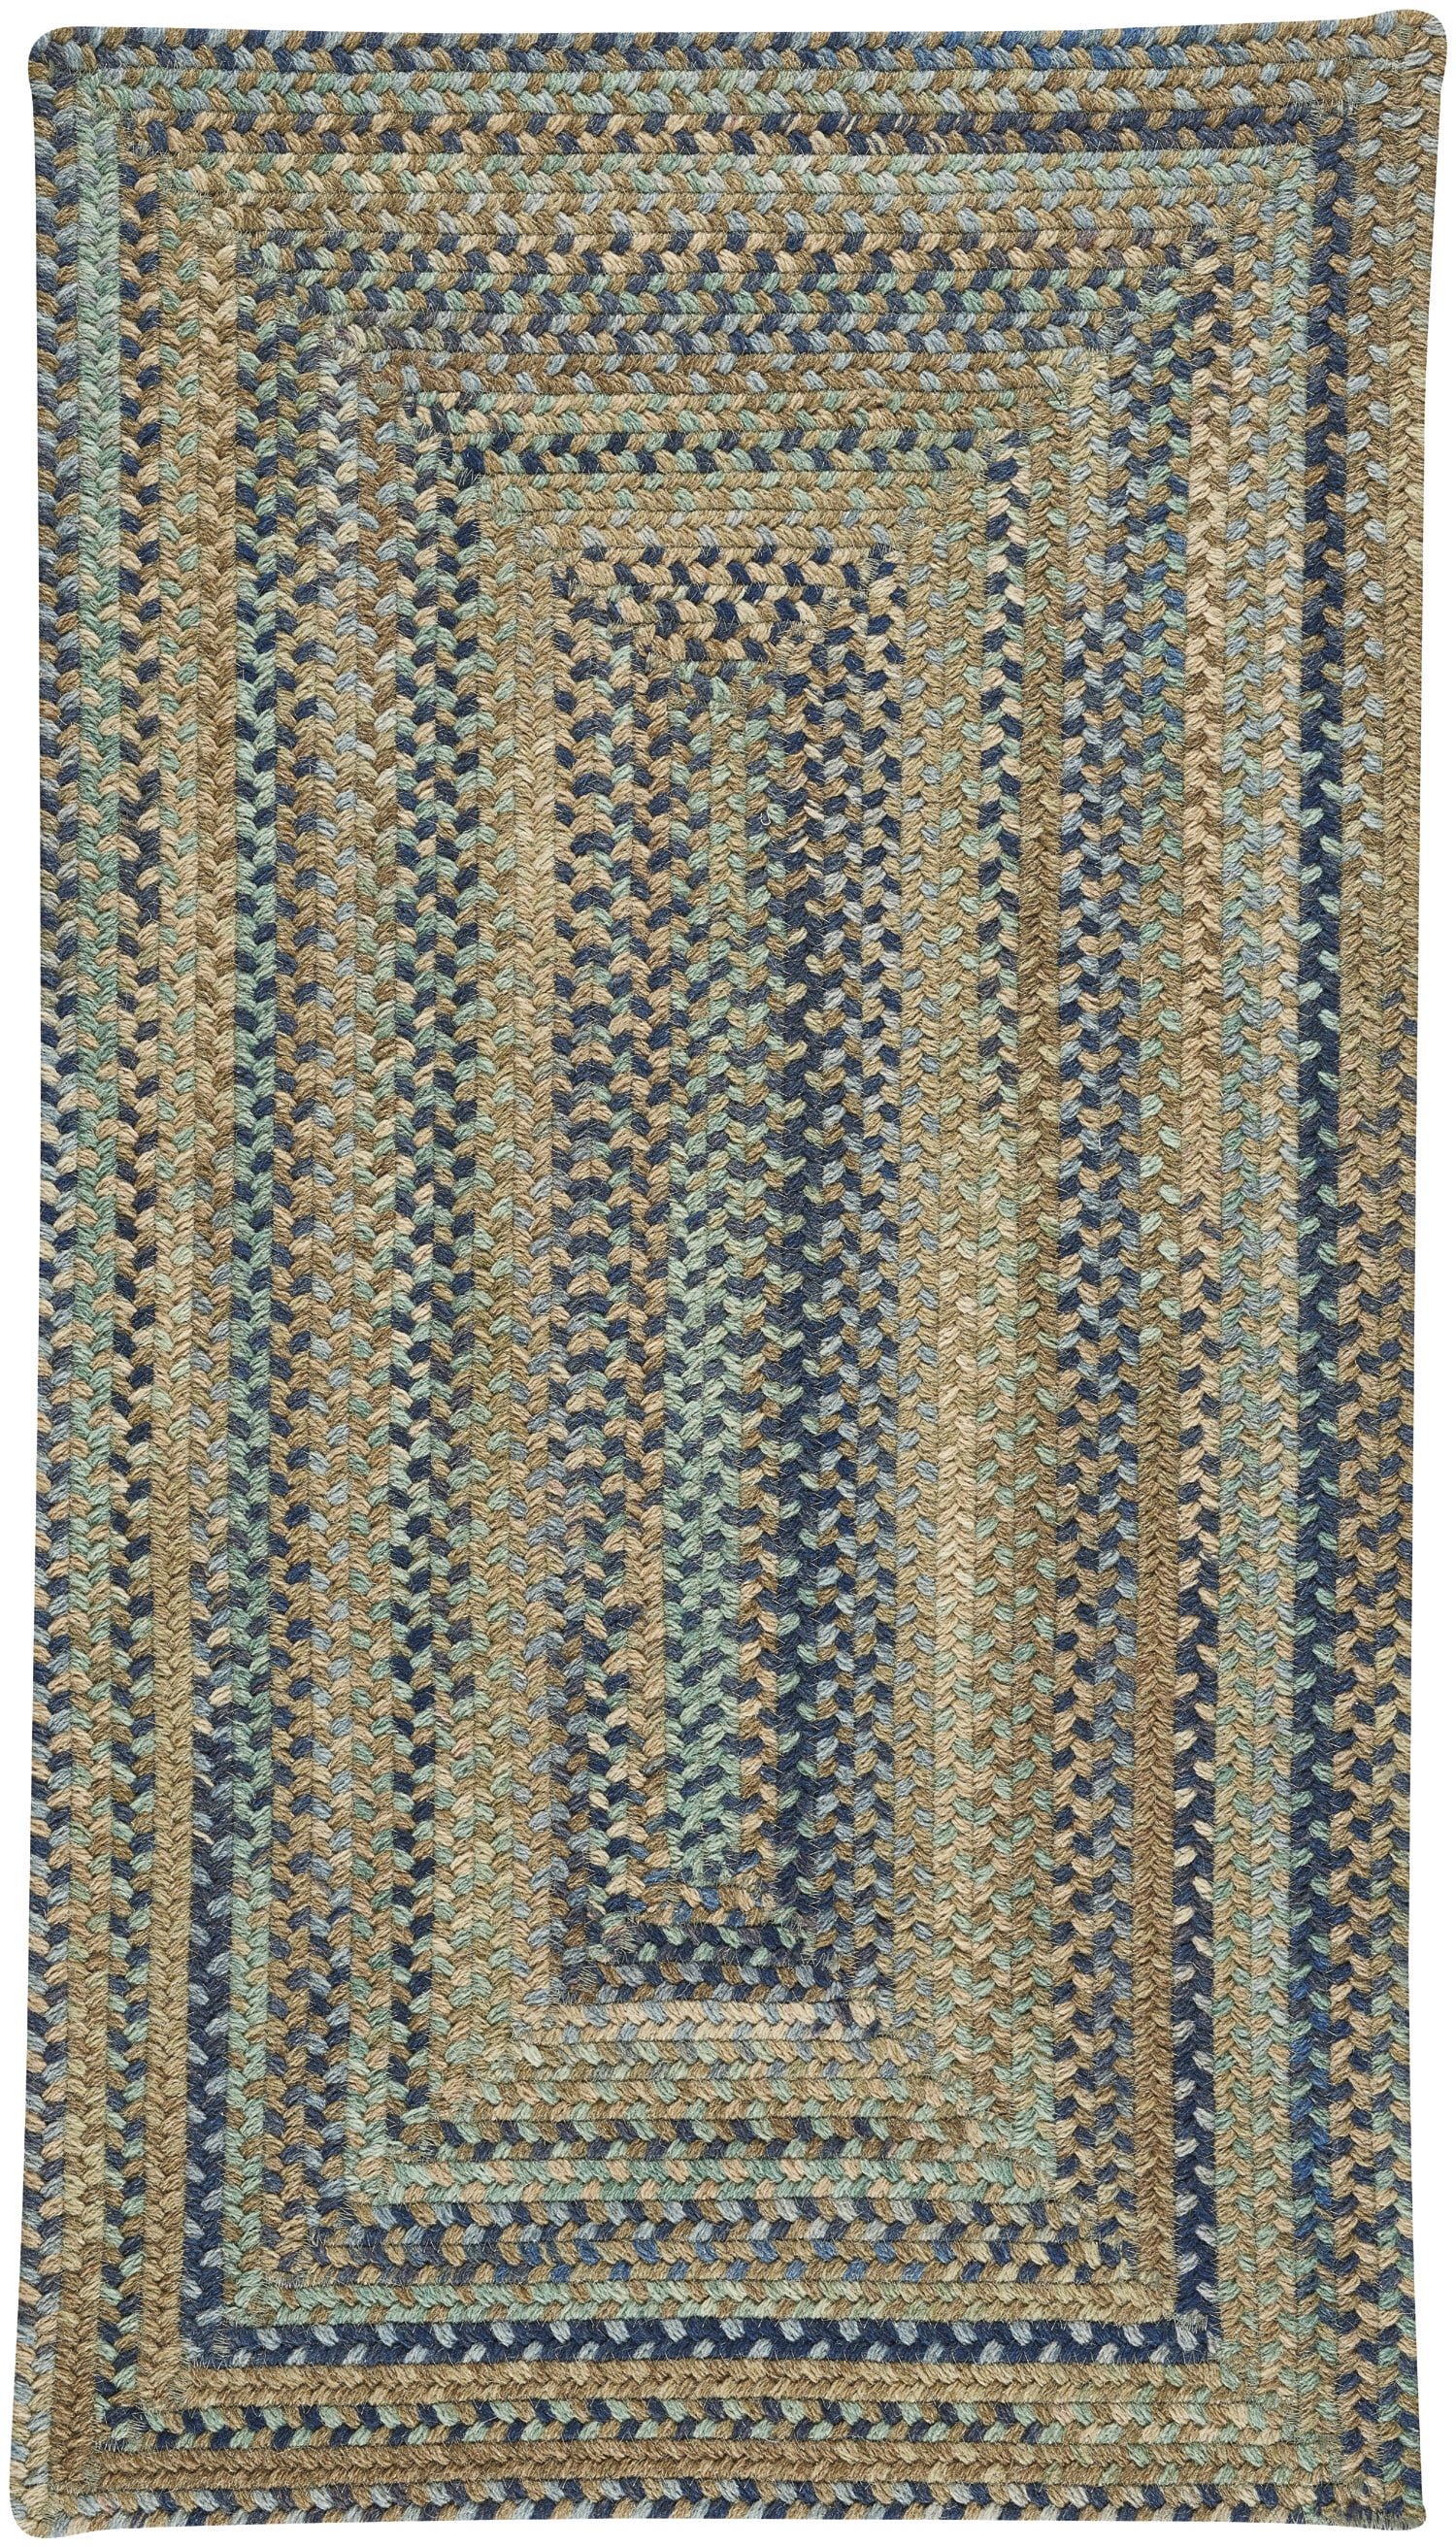 Capel American Heritage Barn Blue 0' 36 x 0' 36 Concentric Rectangle Braided Rug 